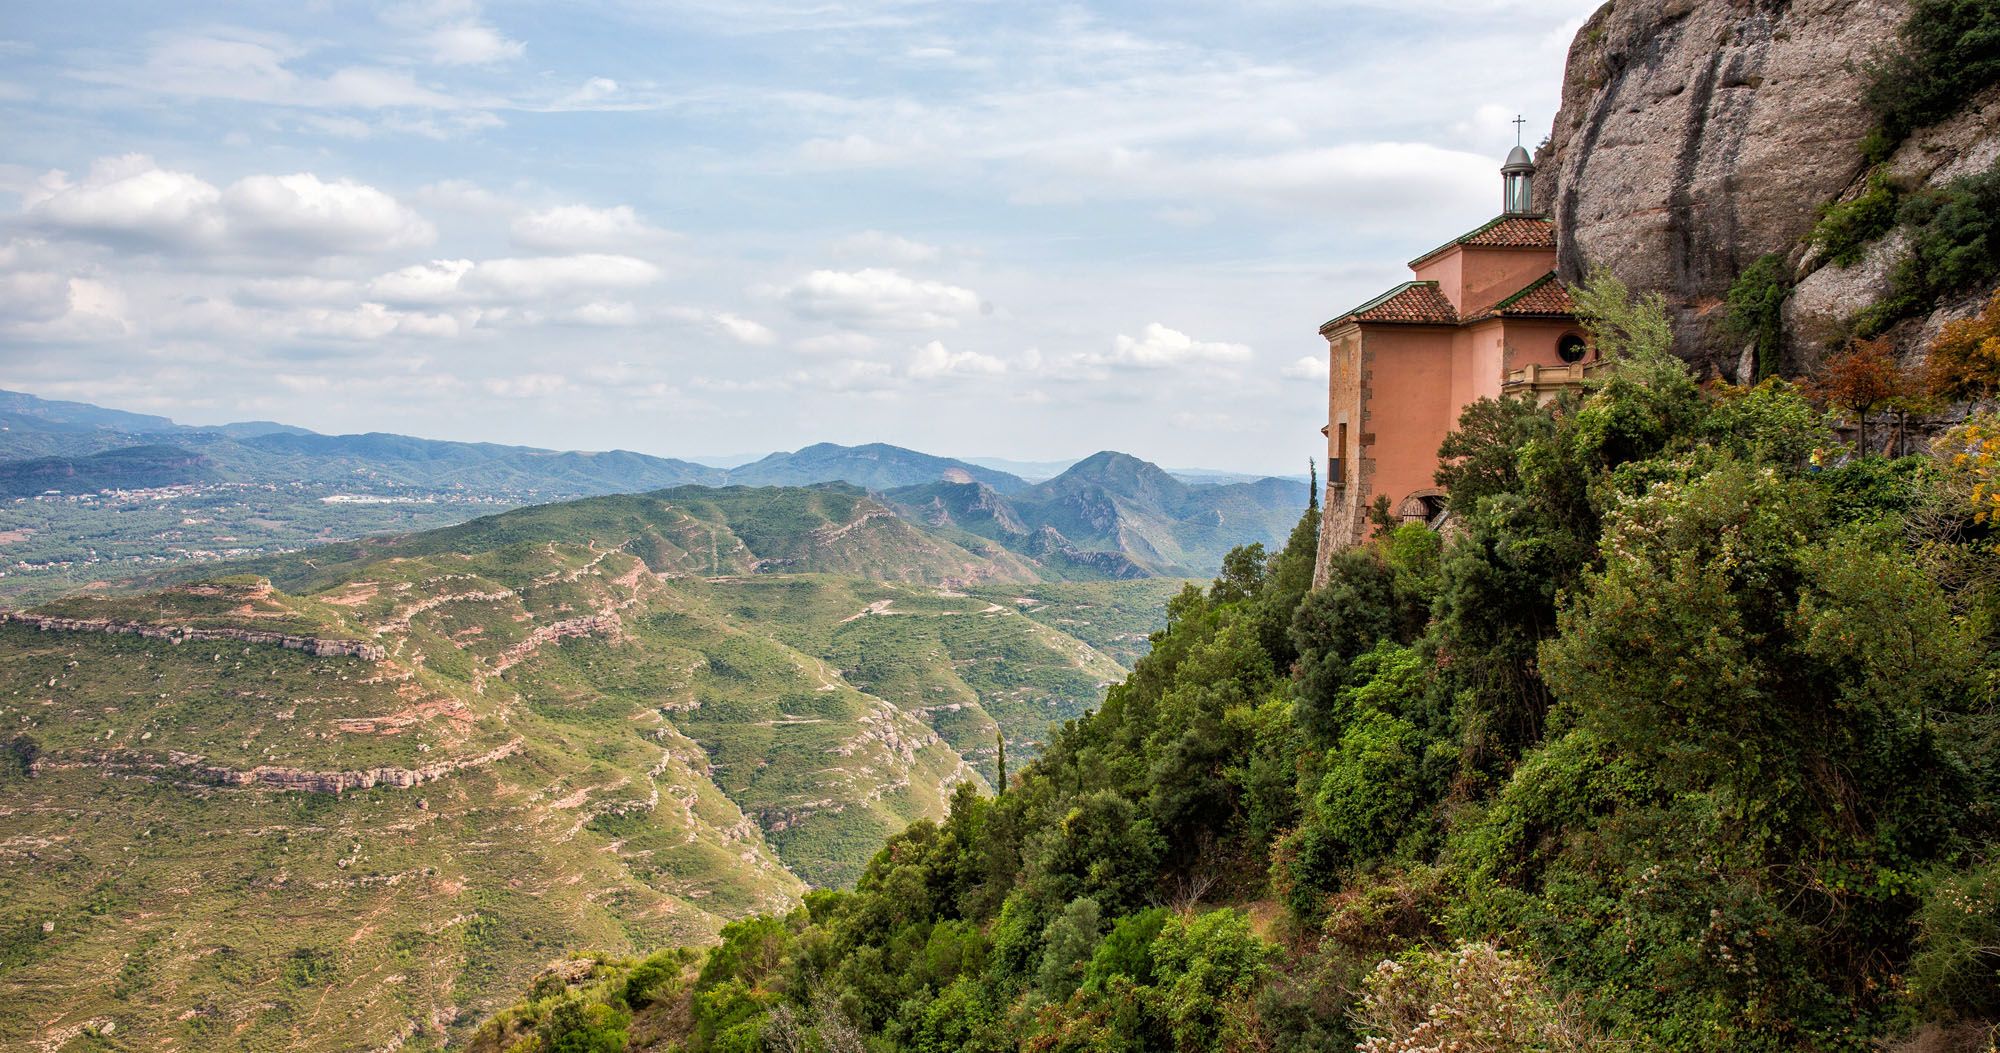 Featured image for “Montserrat Day Trip: How to Visit Montserrat from Barcelona”